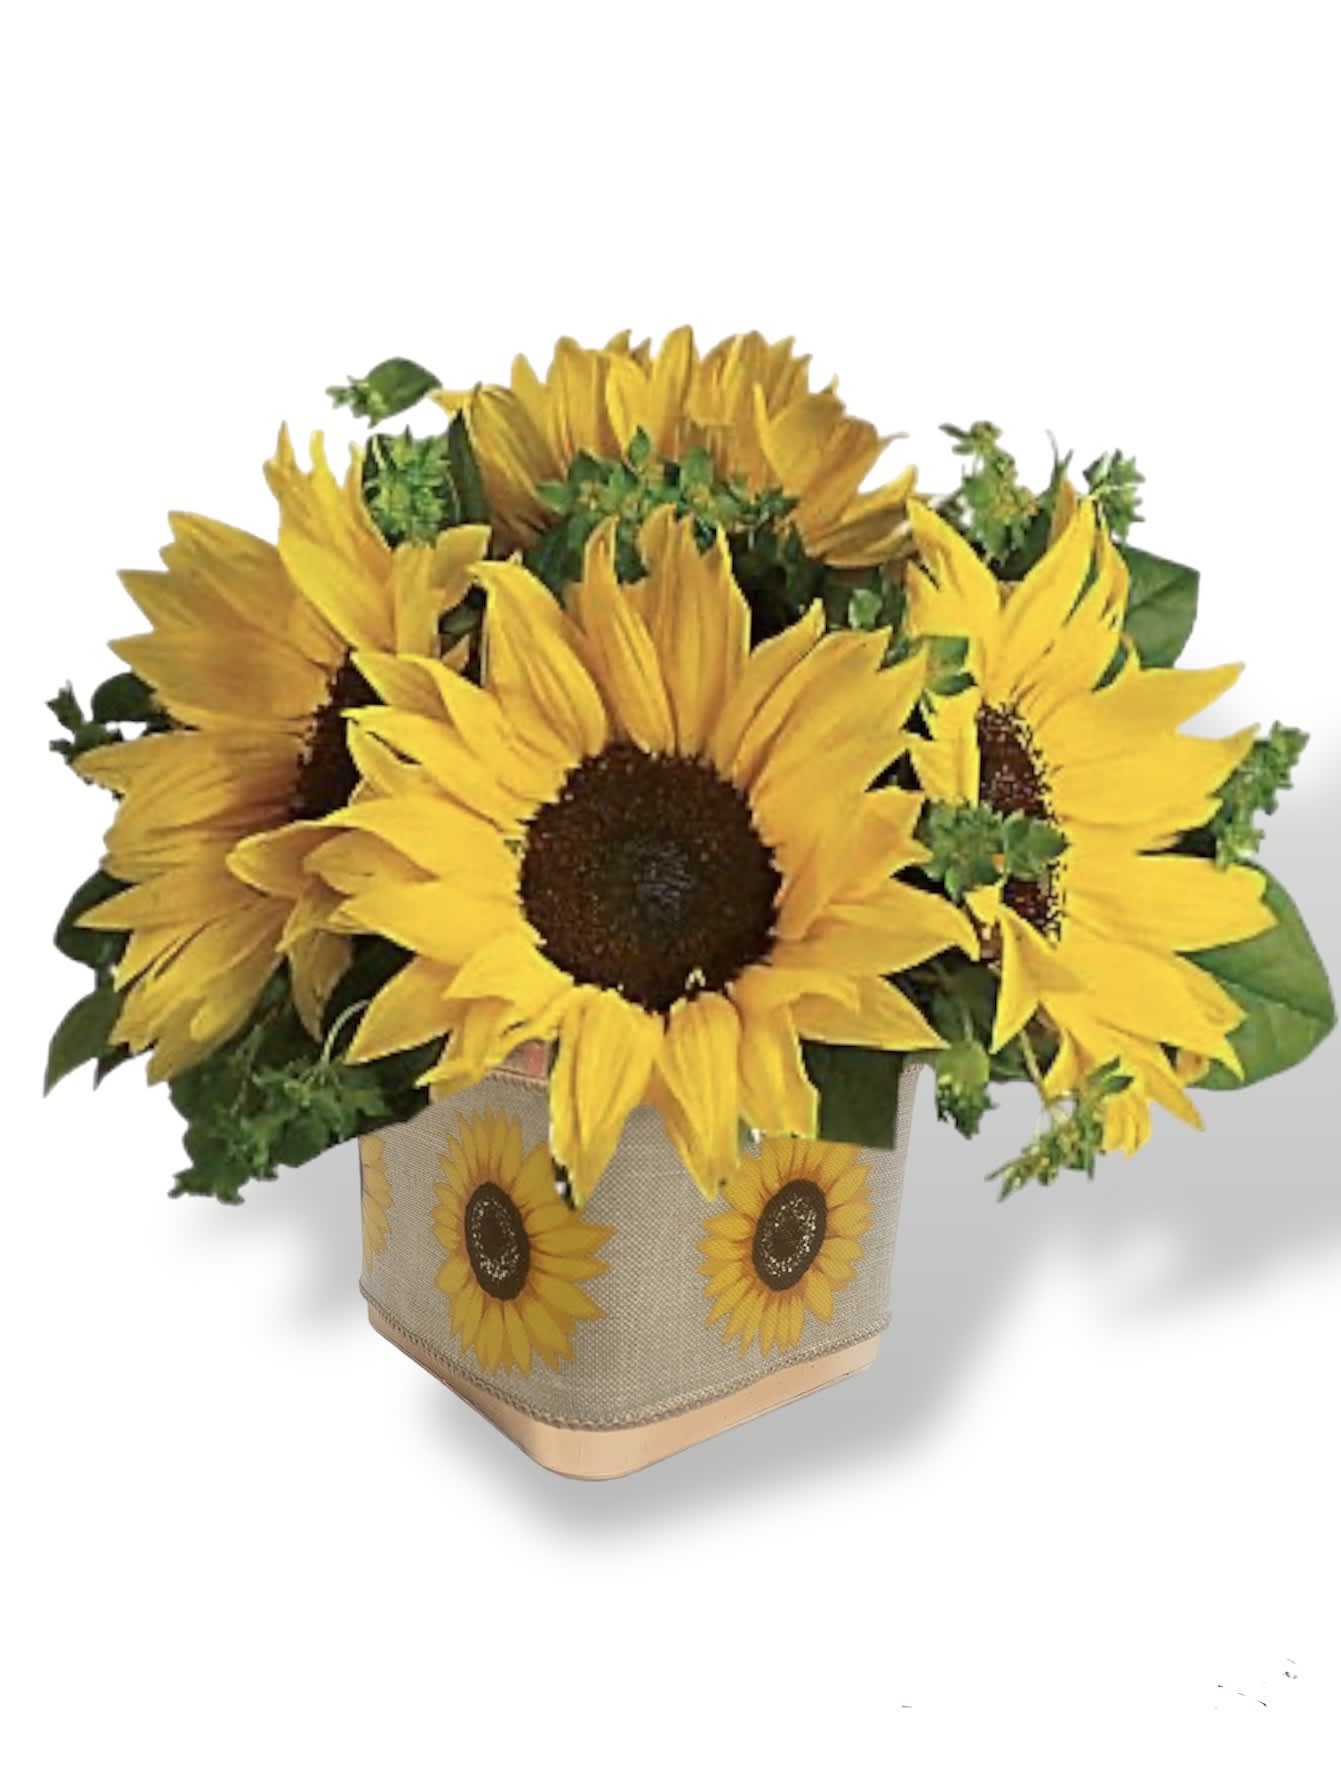 Bright Sunflowers - Whoever receives this stunning bouquet is sure to be bowled over by its bold beauty! It's big on fun and big on flowers.